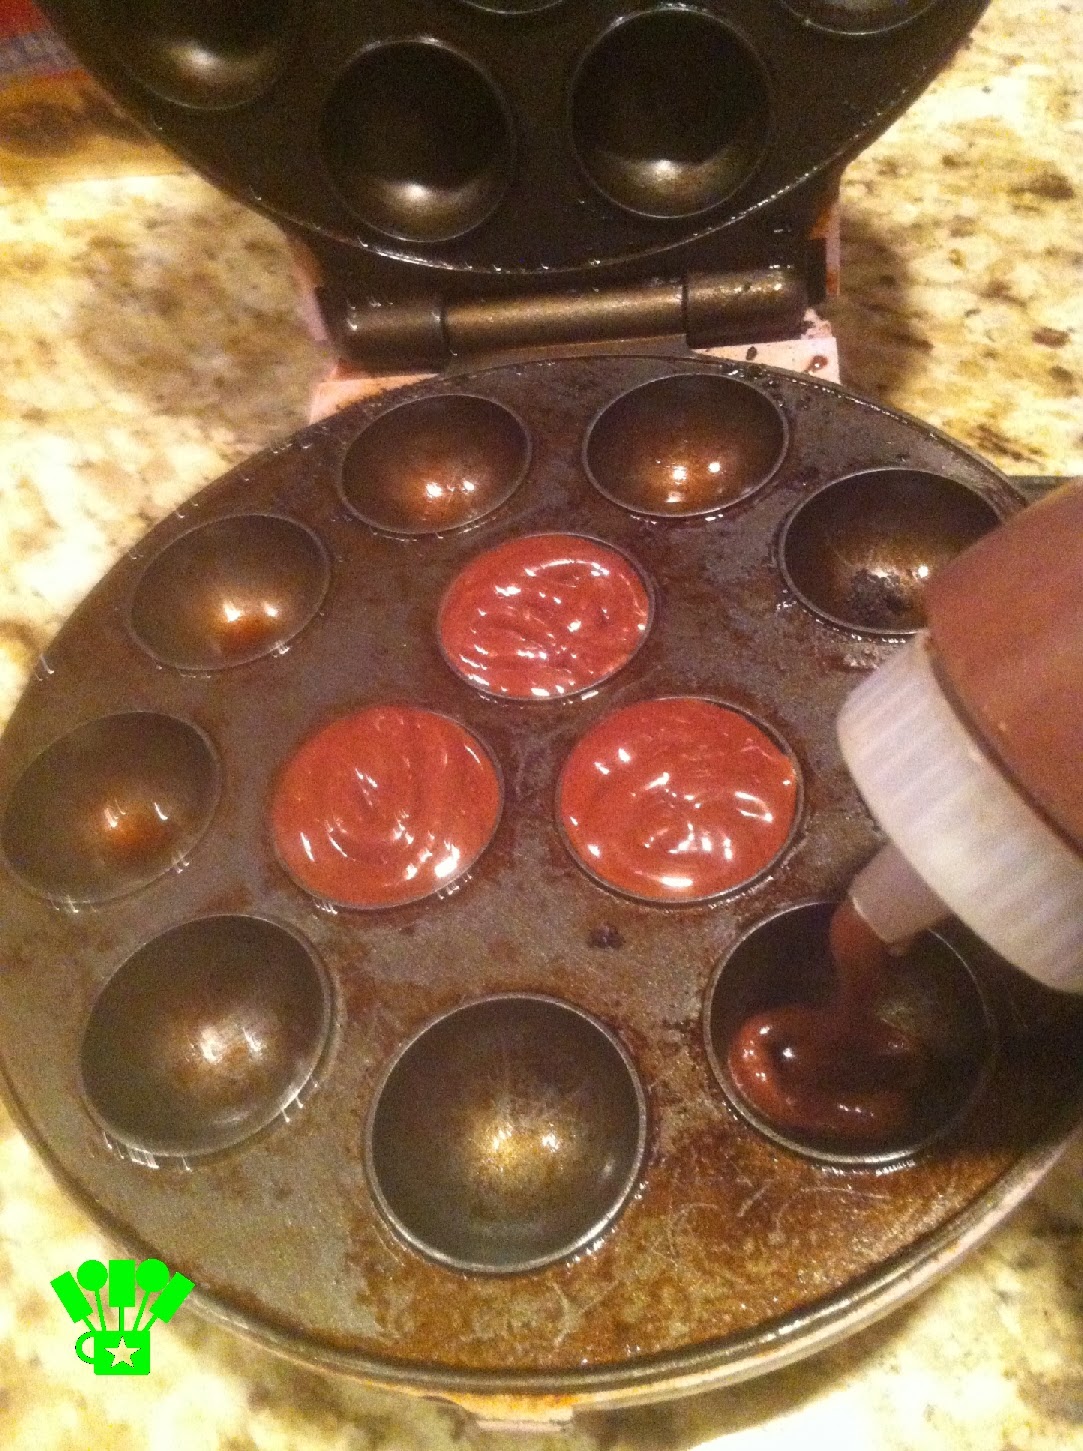 Use a Cake Pop Maker to cook up yummy Brownie Bites with a fun surprise